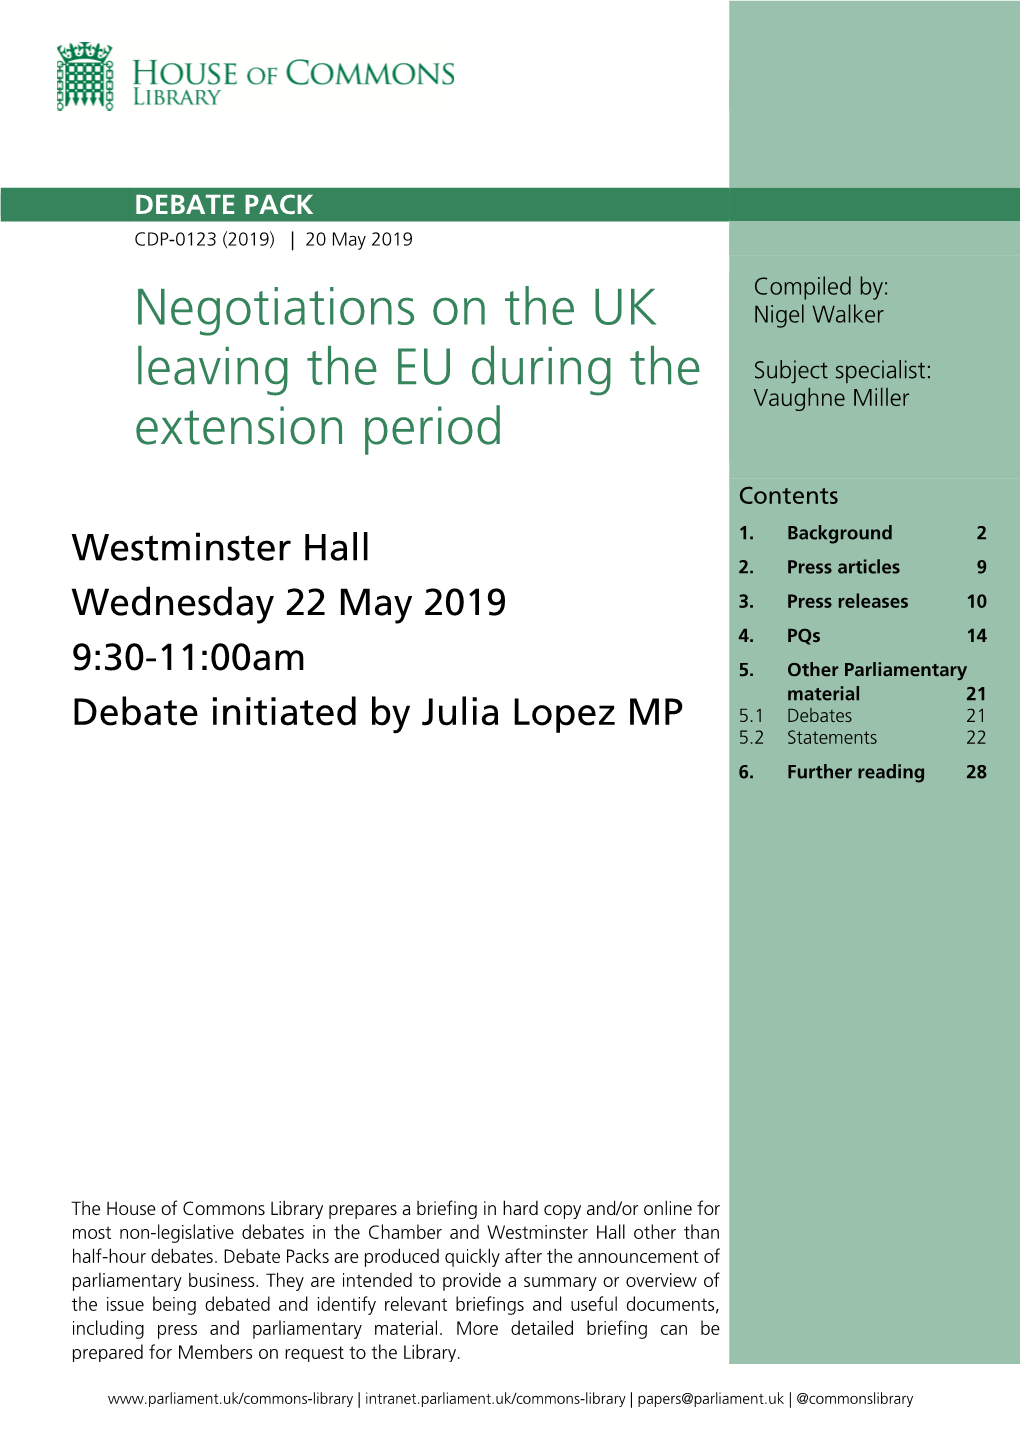 Negotiations on the UK Leaving the EU During the Extension Period 3